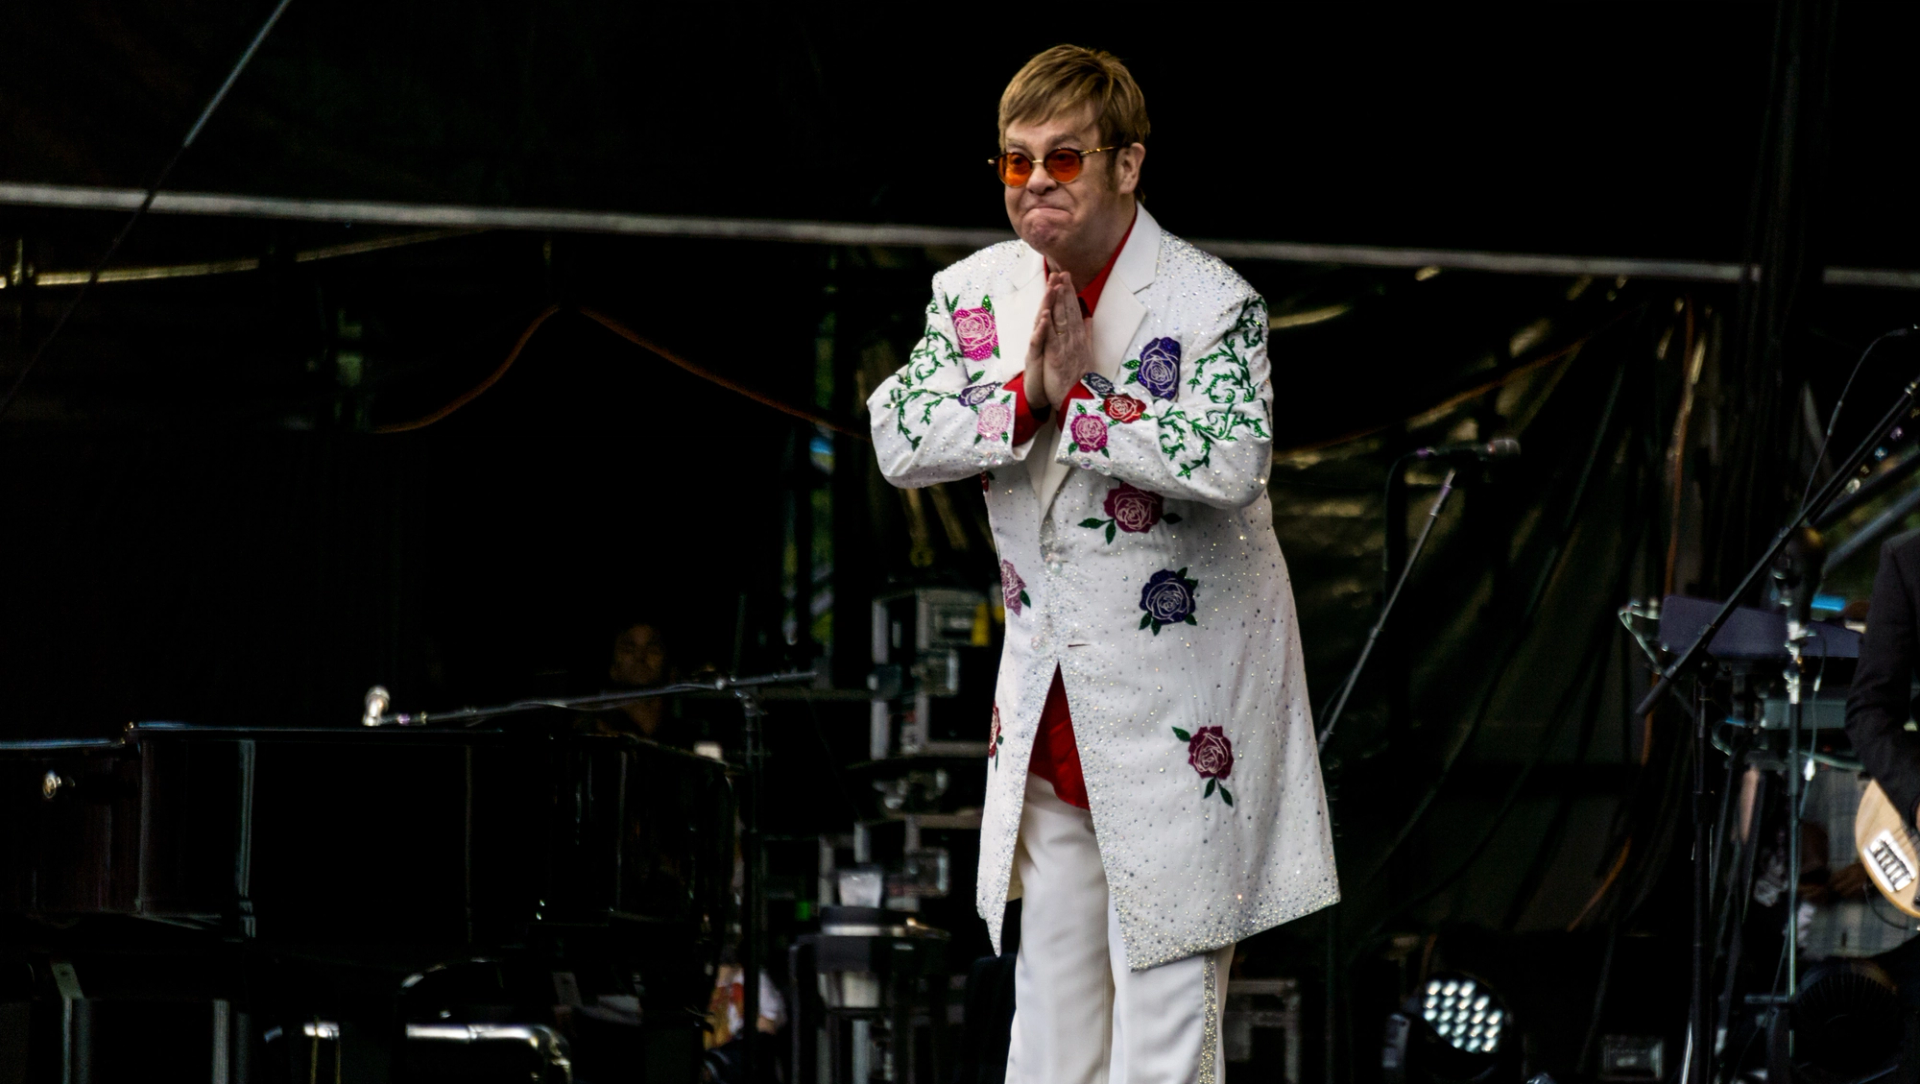 This photograph shows artist Elton John on stage, wearing a white sparkly embroidered suit and his signature colourful sunglasses.